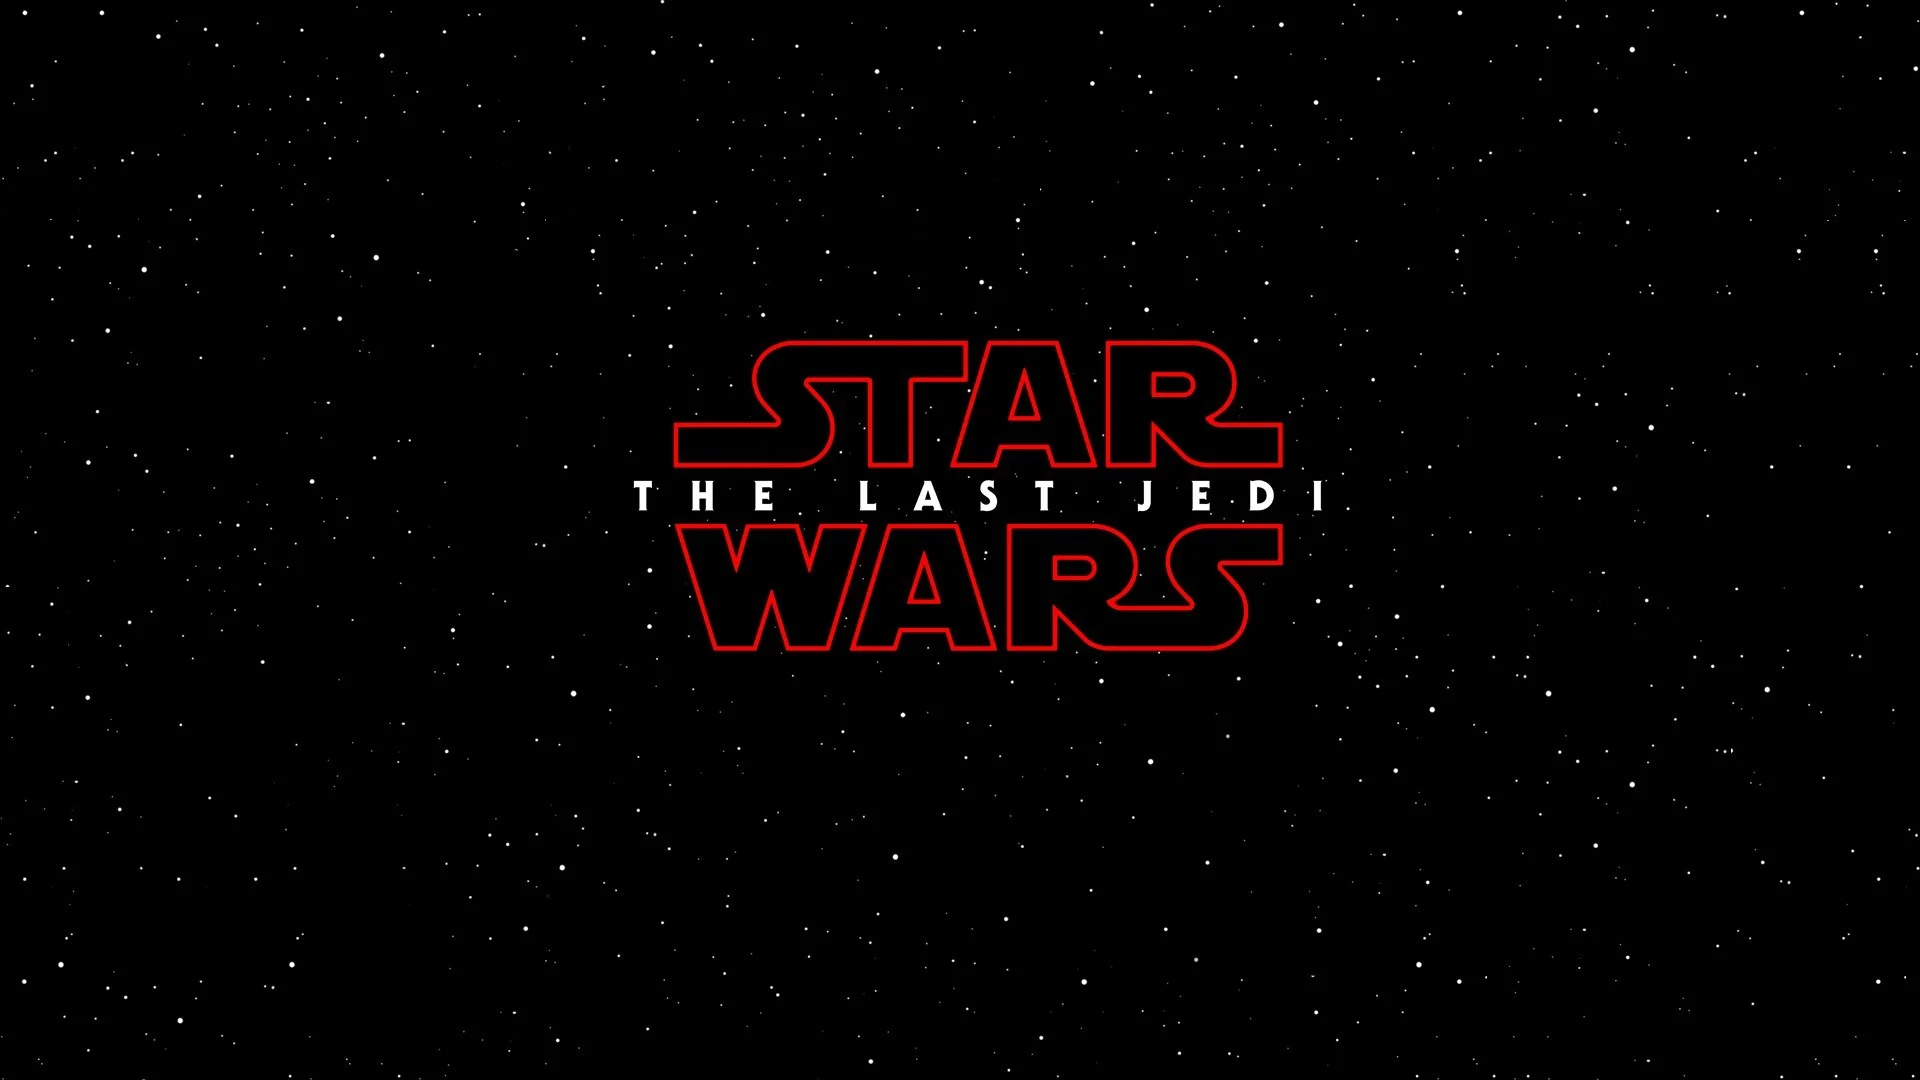 Star Wars, Star Wars The Last Jedi Wallpapers HD / Desktop and Mobile Backgrounds